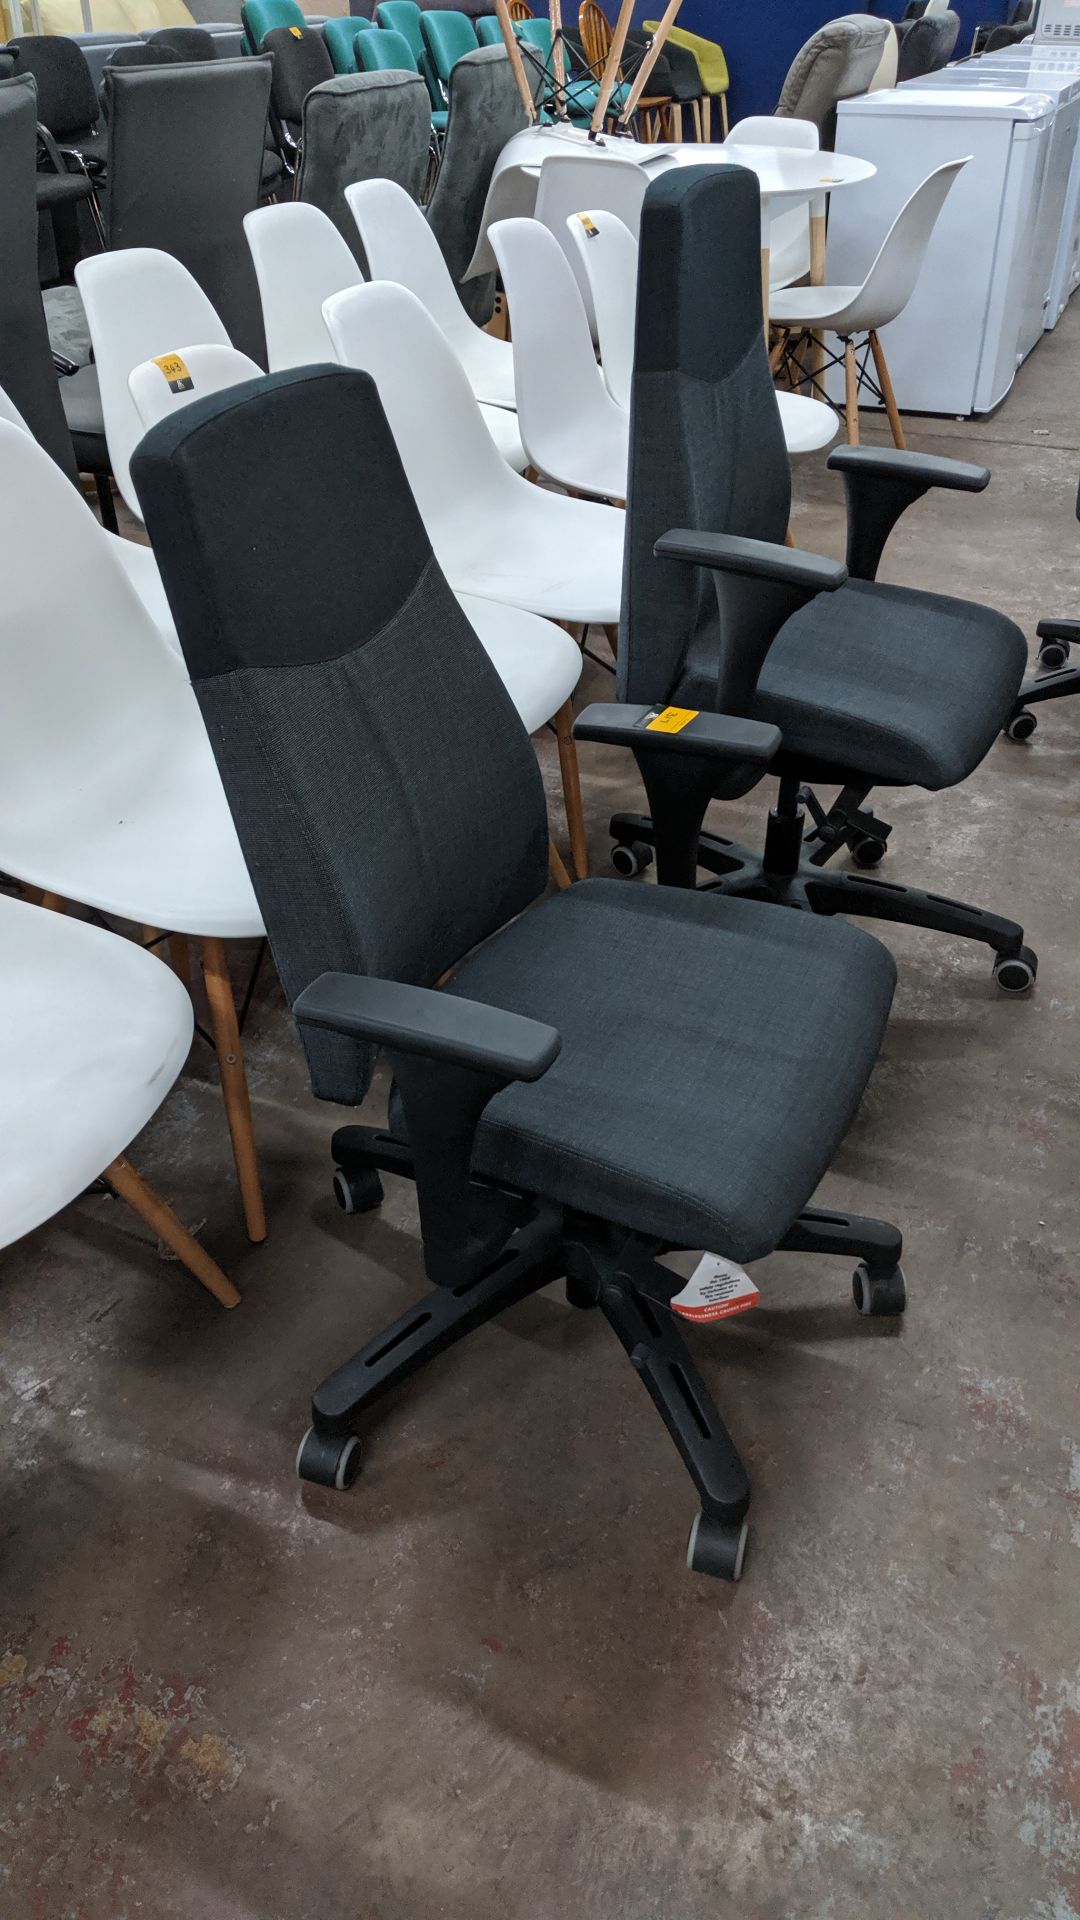 Pair of modern grey & black executive chairs with arms NB Lots 317 - 319 each consist of a pair of - Image 2 of 5